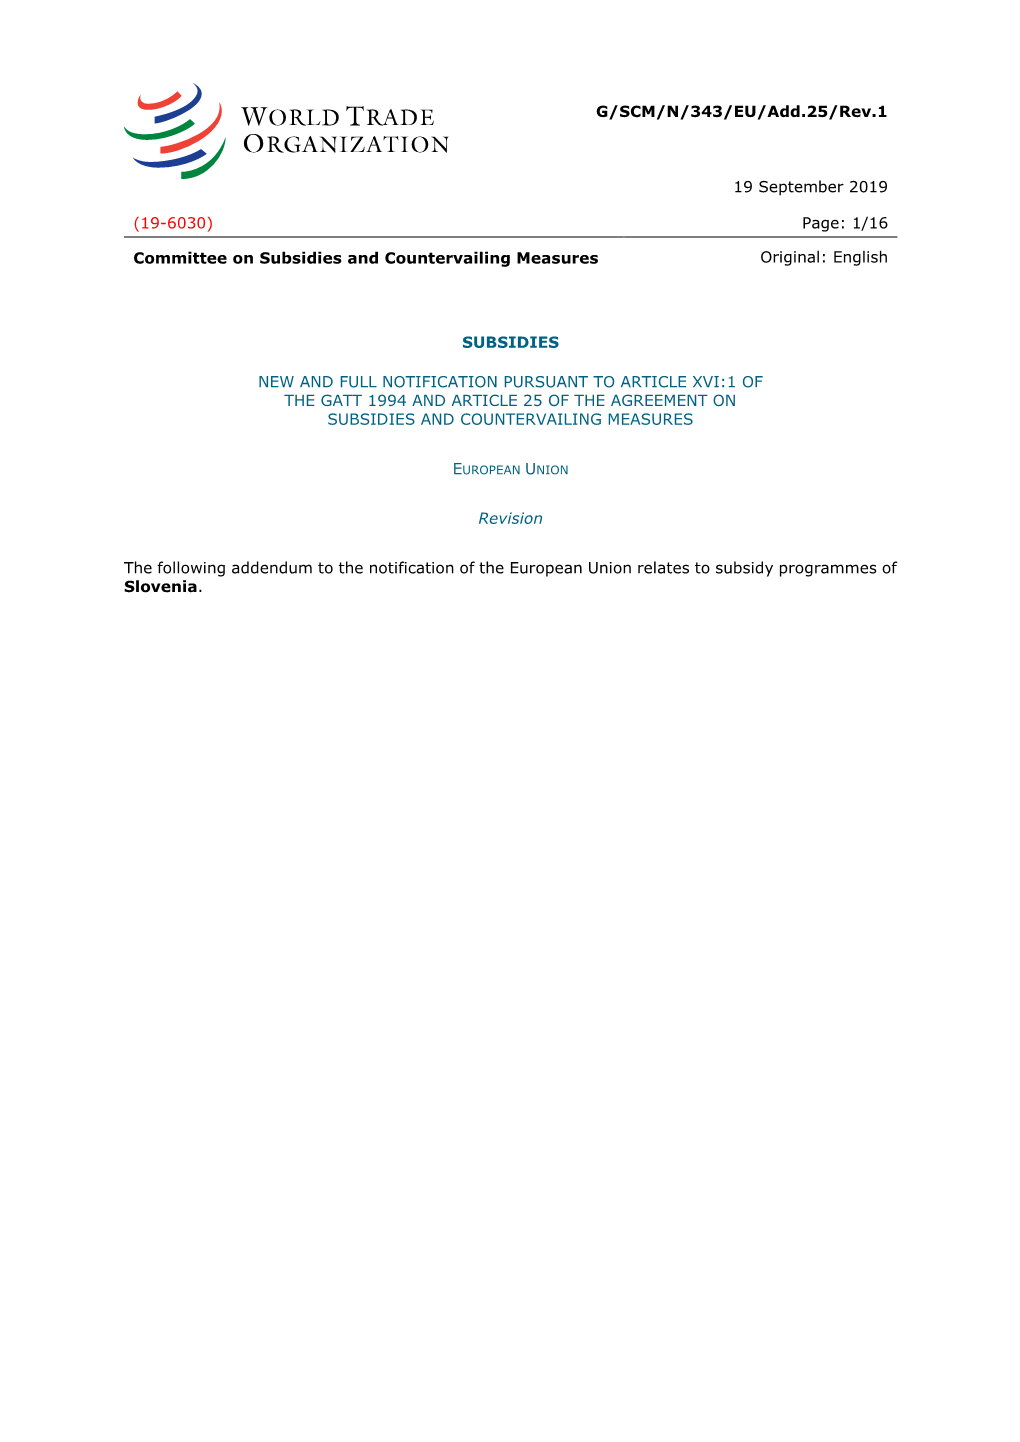 G/SCM/N/343/EU/Add.25/Rev.1 19 September 2019 (19-6030) Page: 1/16 Committee on Subsidies and Countervailing Measures Original